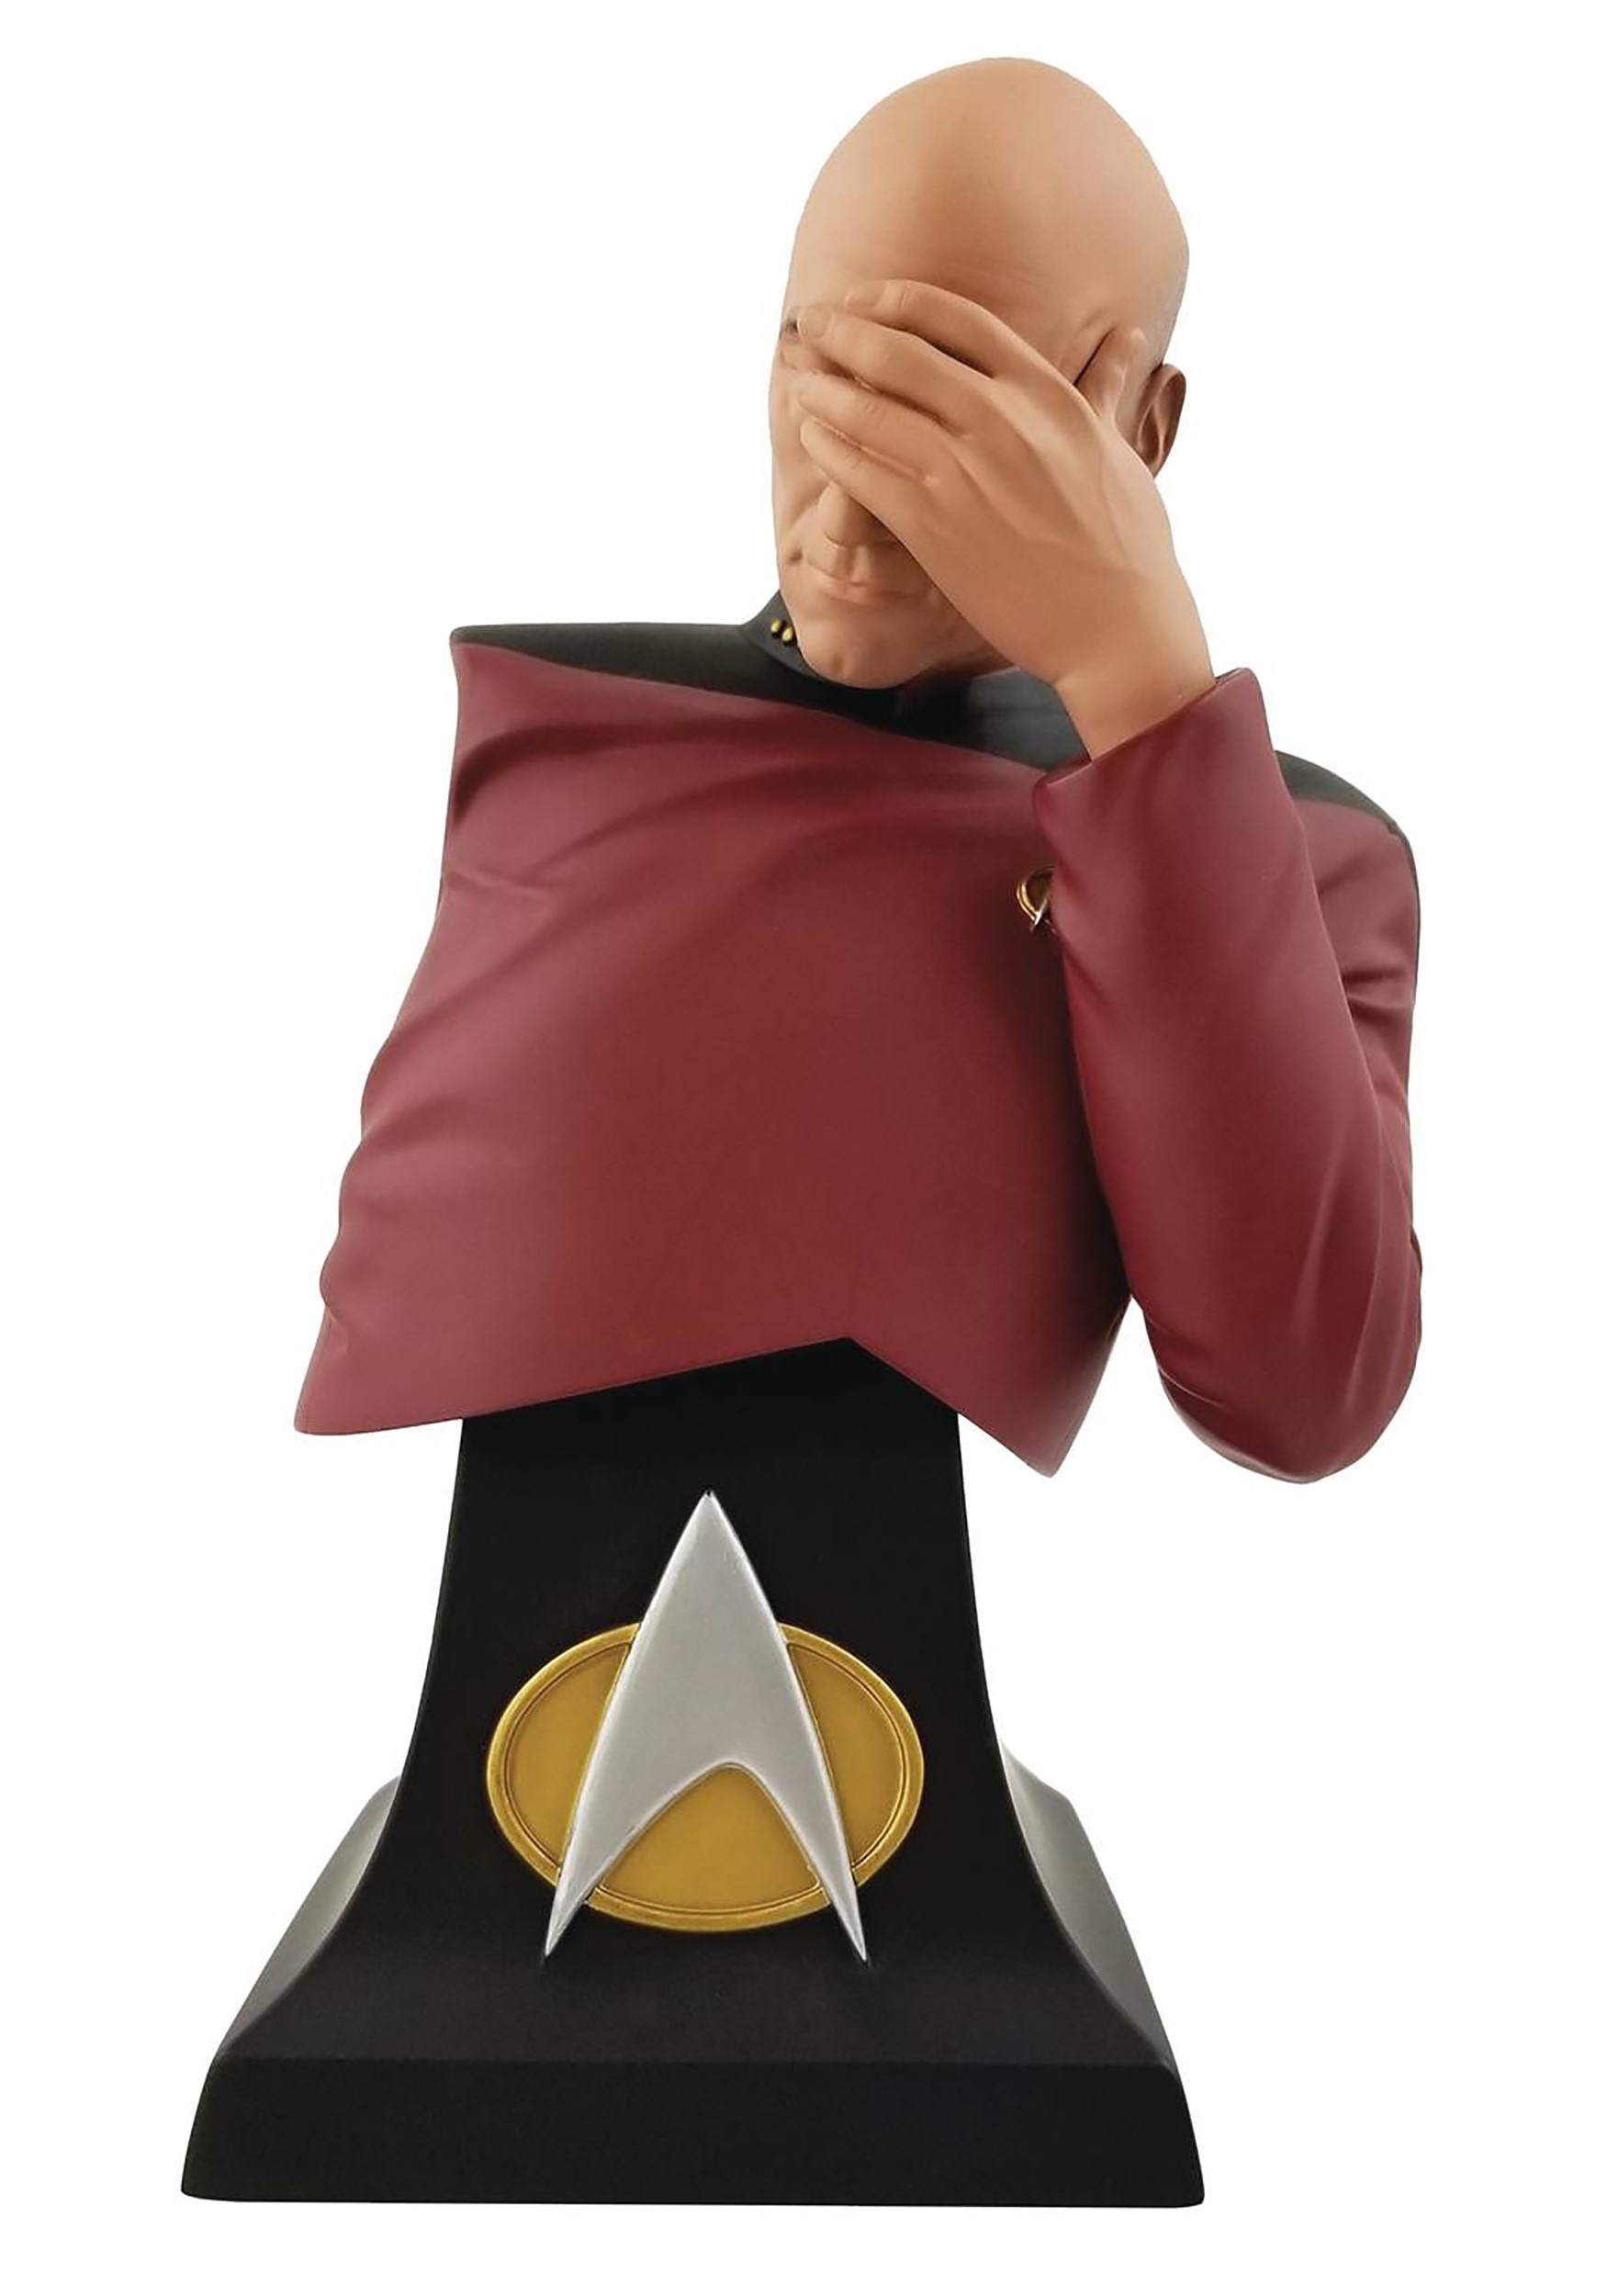 Limited Edition SDCC 2020 Star Trek: TNG Picard Facepalm Paperweight